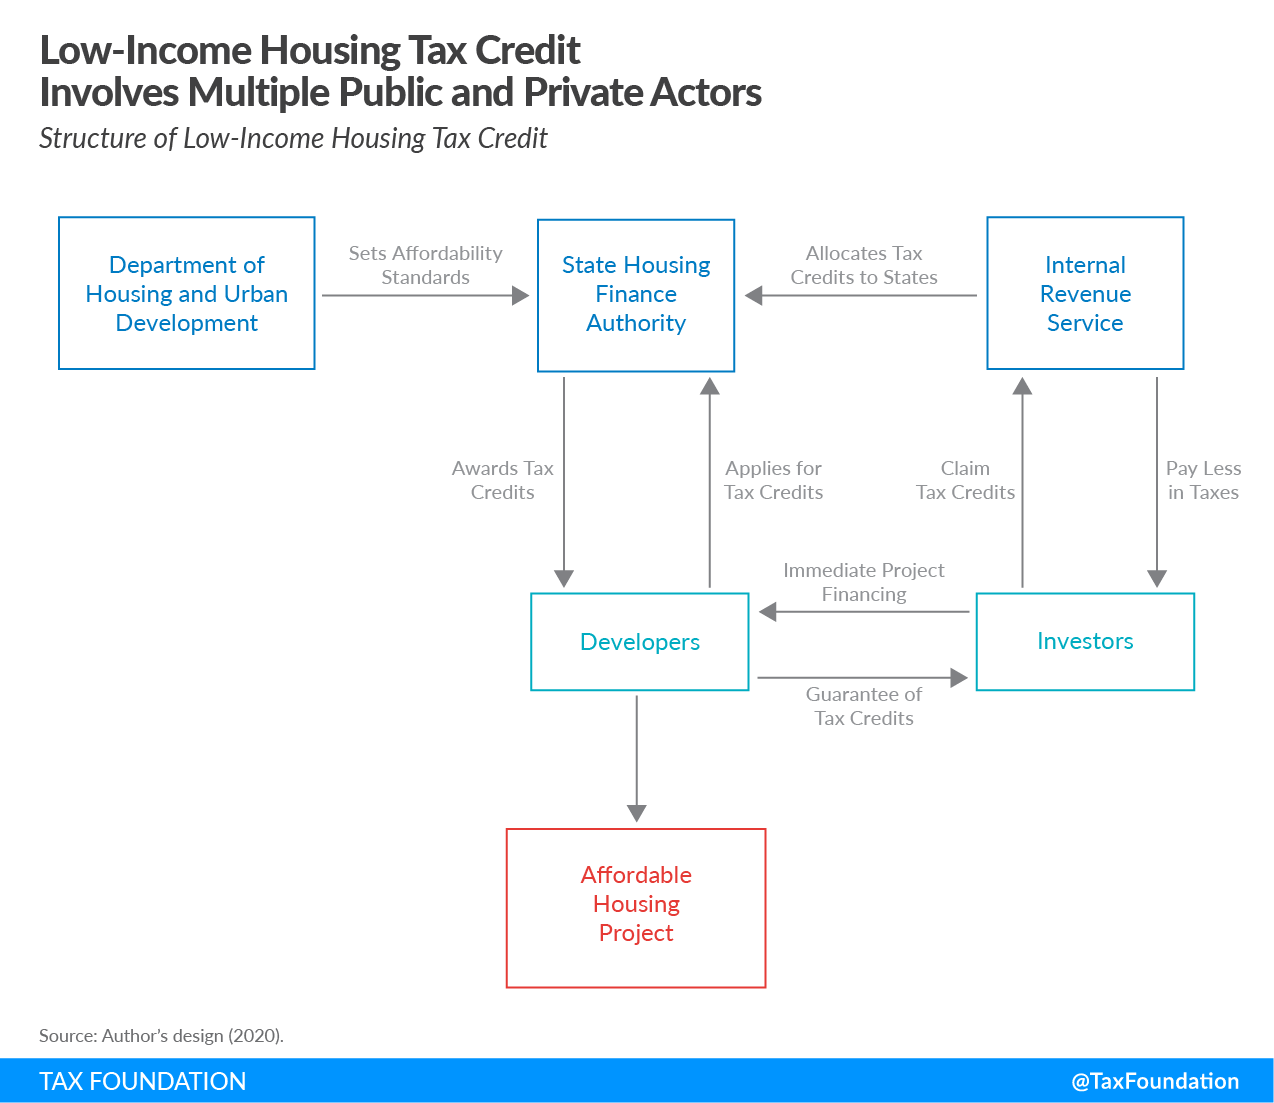 The Low-Income Housing Tax Credit (LIHTC)